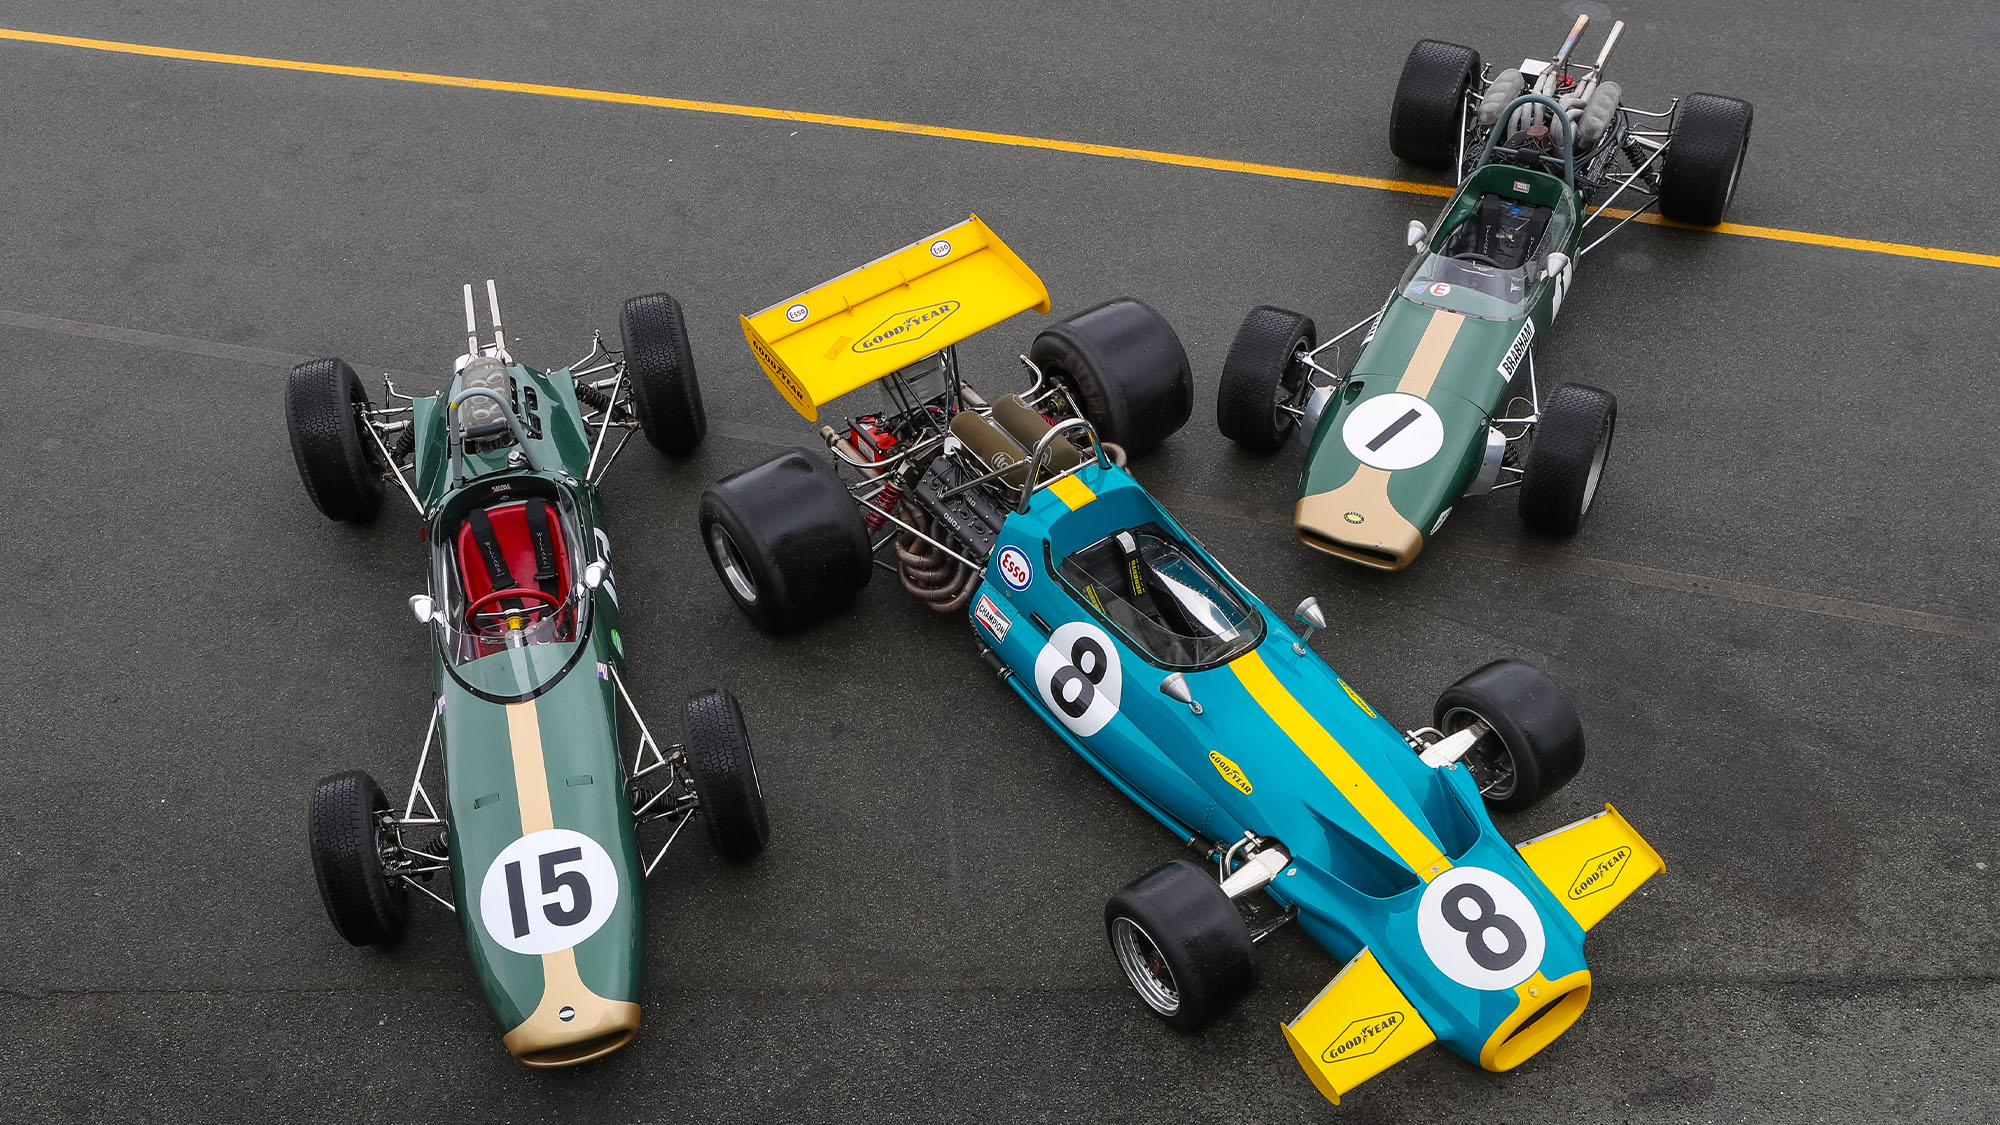 With the V-8-powered Mid-engine BT3, Jack Brabham Became the First Driver  in Formula One History To Win Races in a Car of His Own Construction